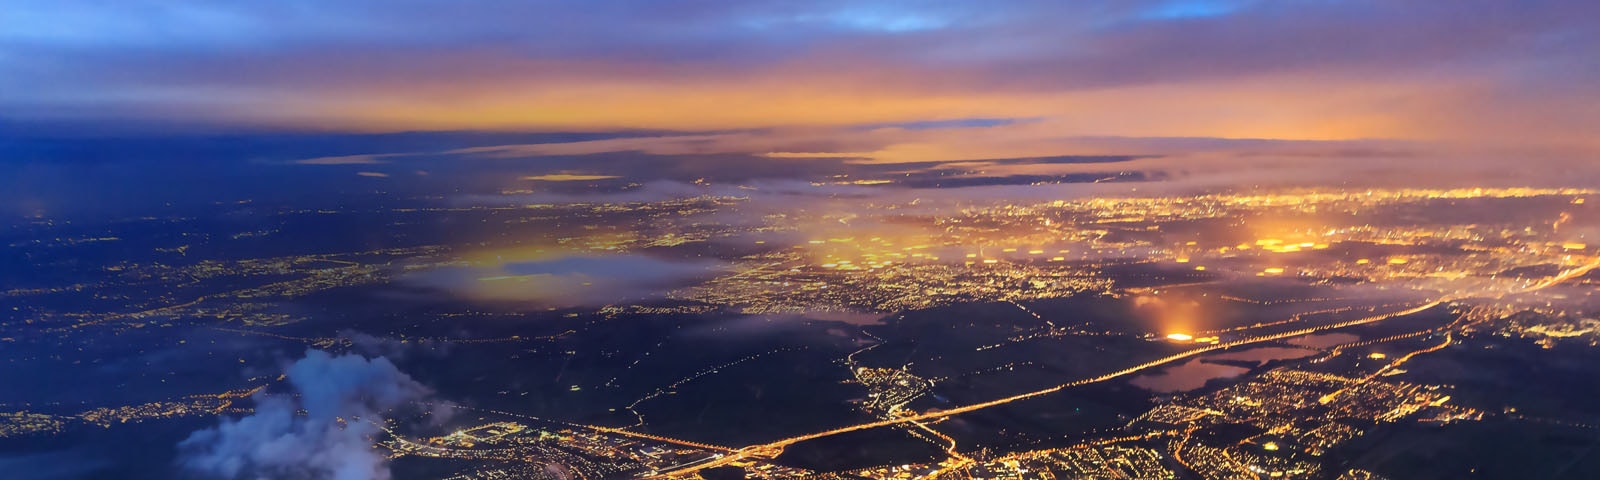 Networking Technology Trends - Aerial view of a city at night